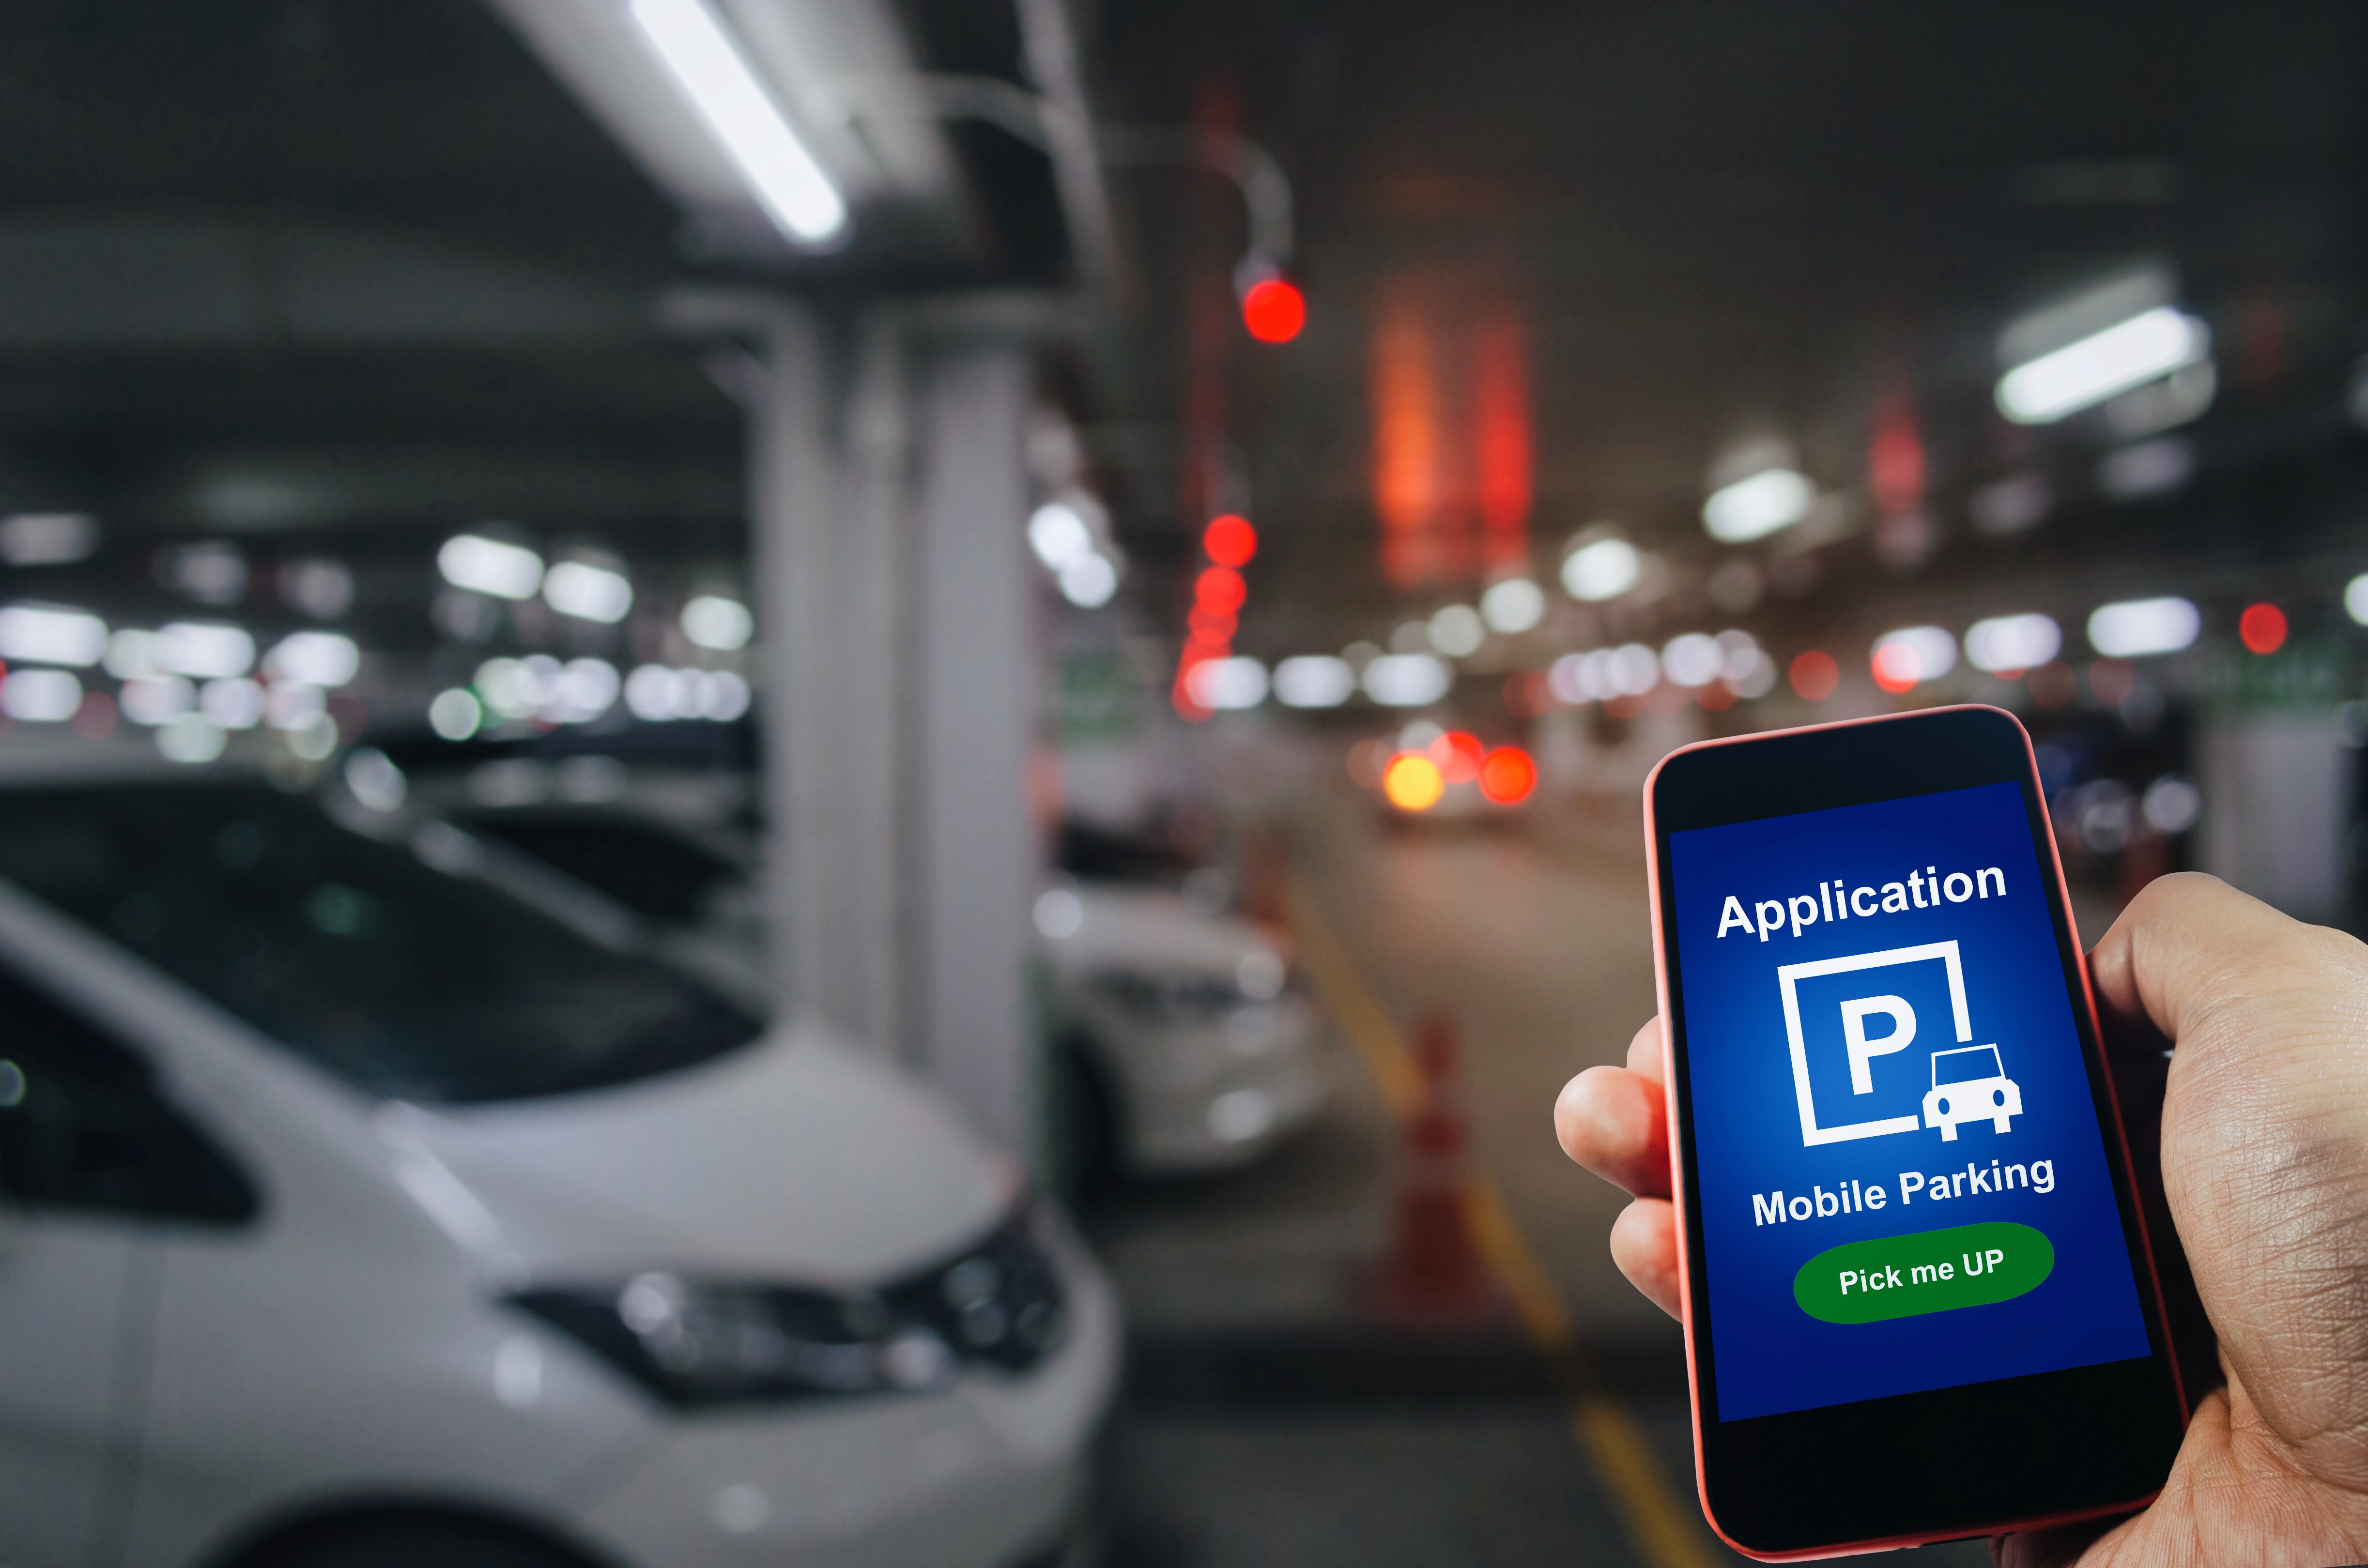 Interparking Counters APCOA and Q-Park Expansion, Parking Prices Surge